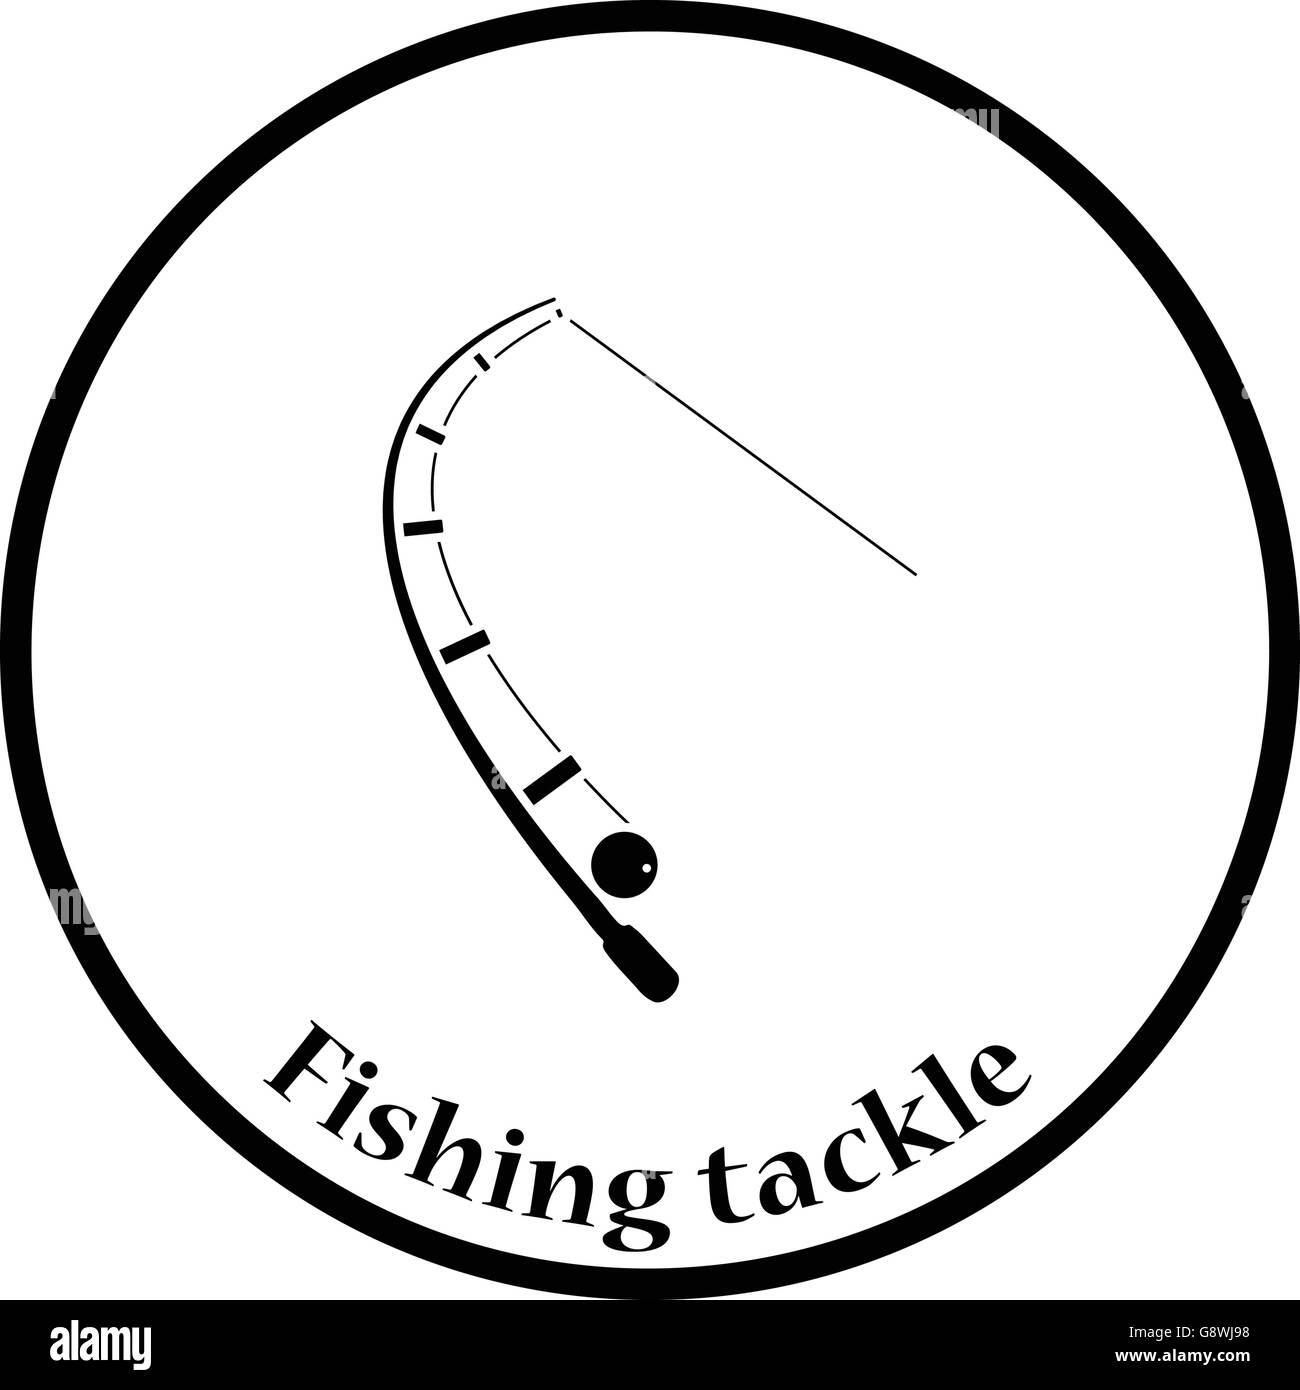 Icon of curved fishing tackle. Thin circle design. Vector illustration. Stock Vector